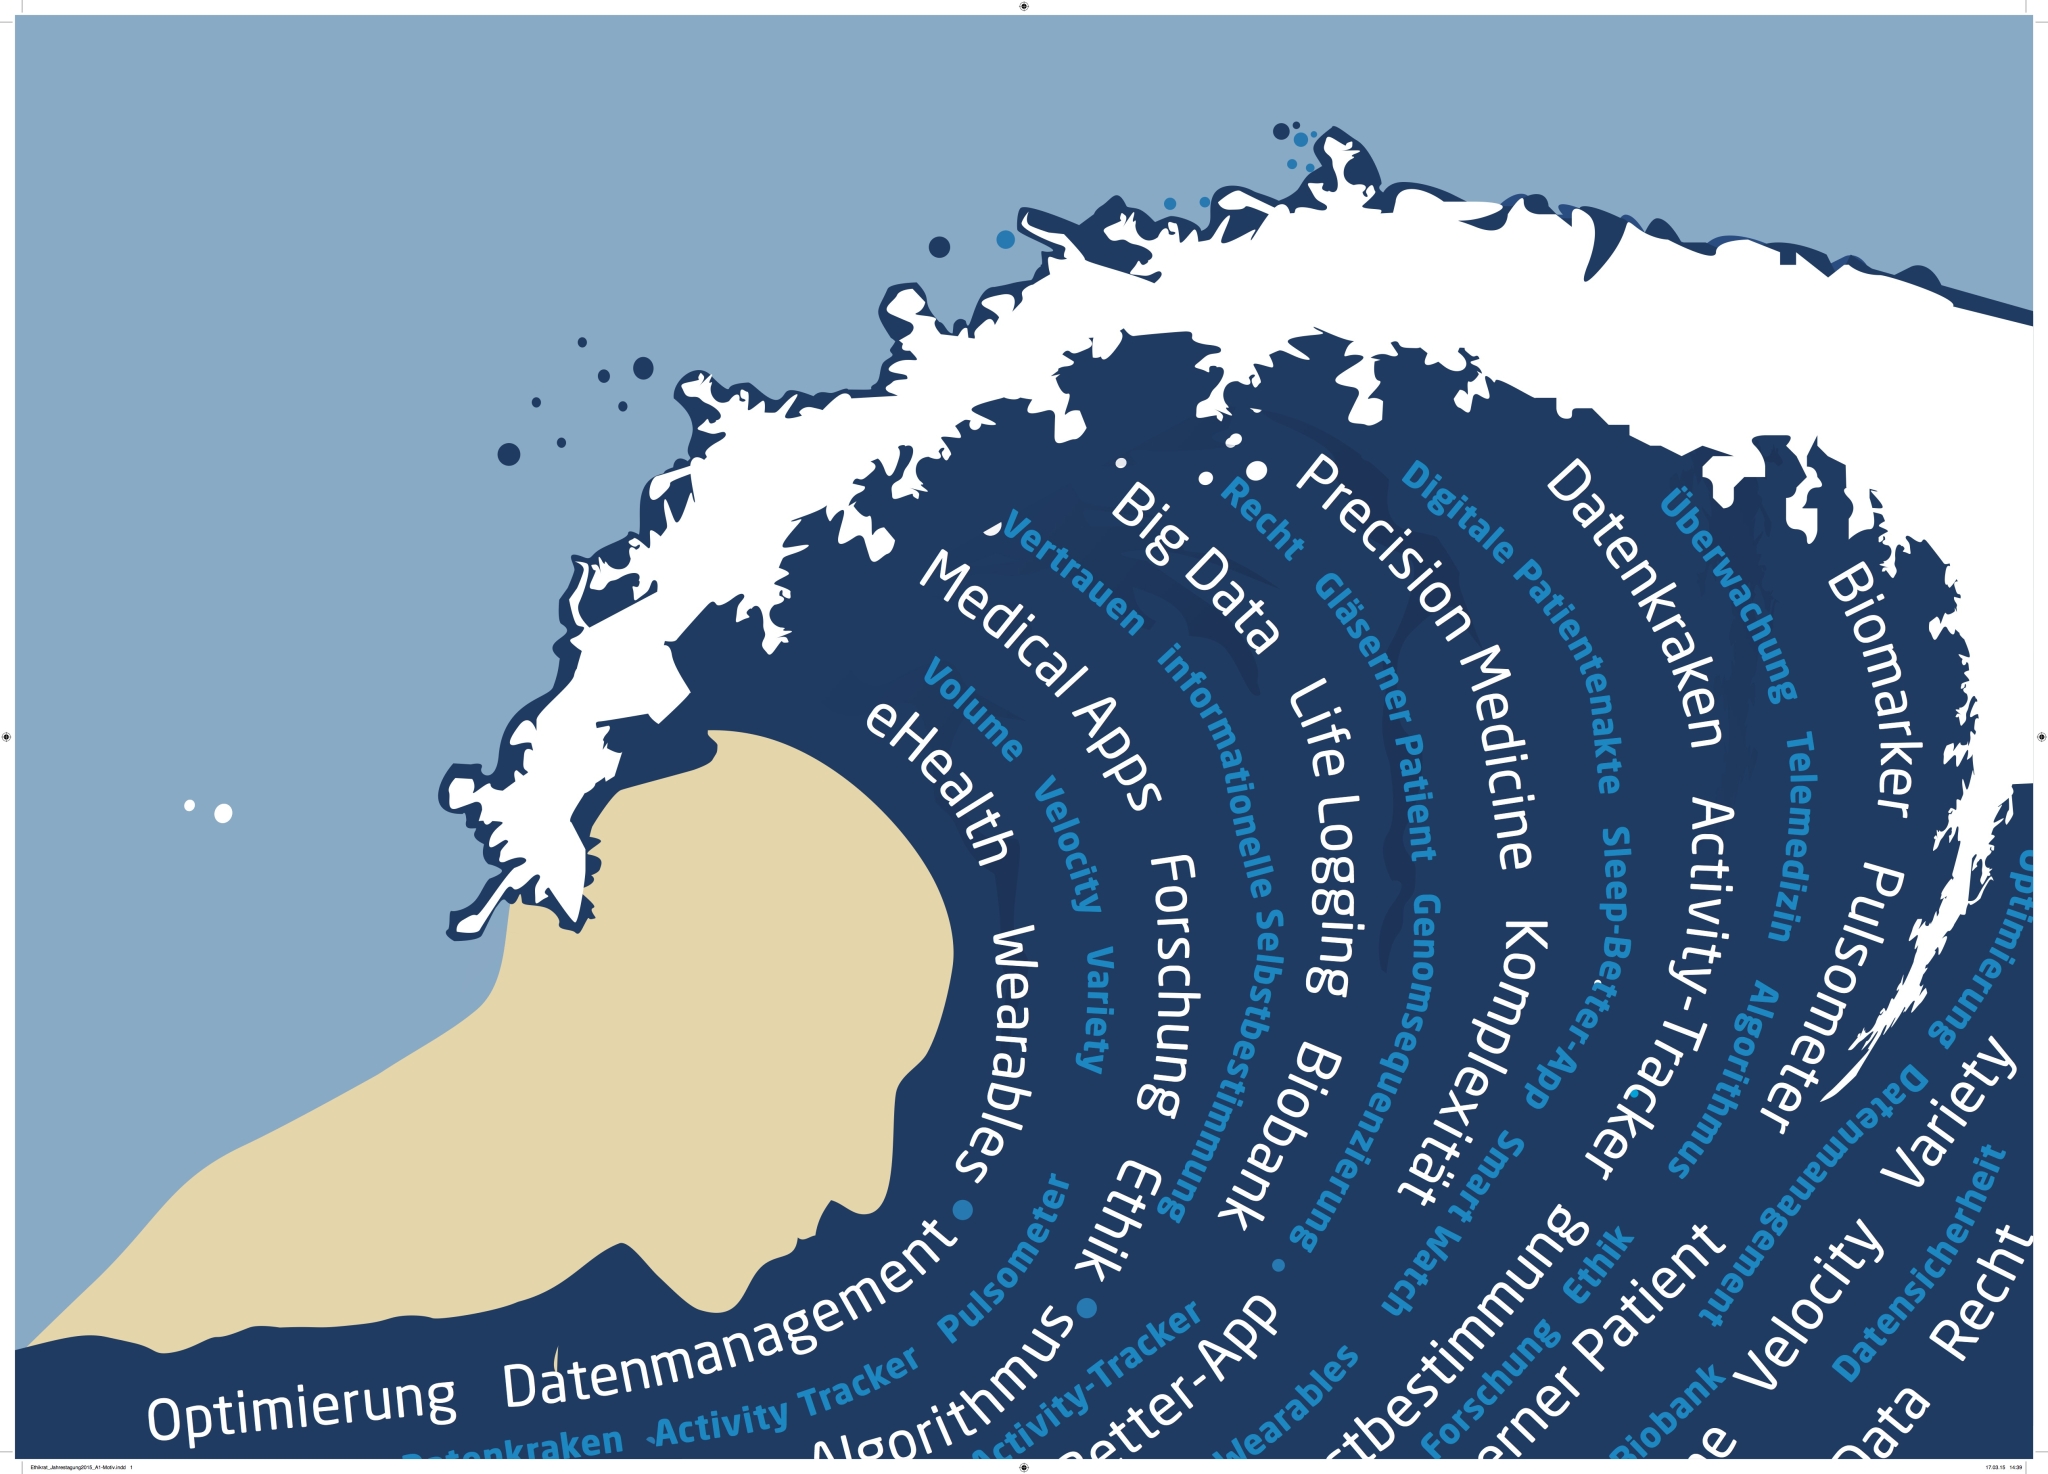 The diagram shows a huge tidal wave with a mighty crest breaking on a person with a bowed head. Along the wave are keywords that reflect the opportunities (optimisation, data management, research, precision medicine) and risks (databases, monitoring) of u